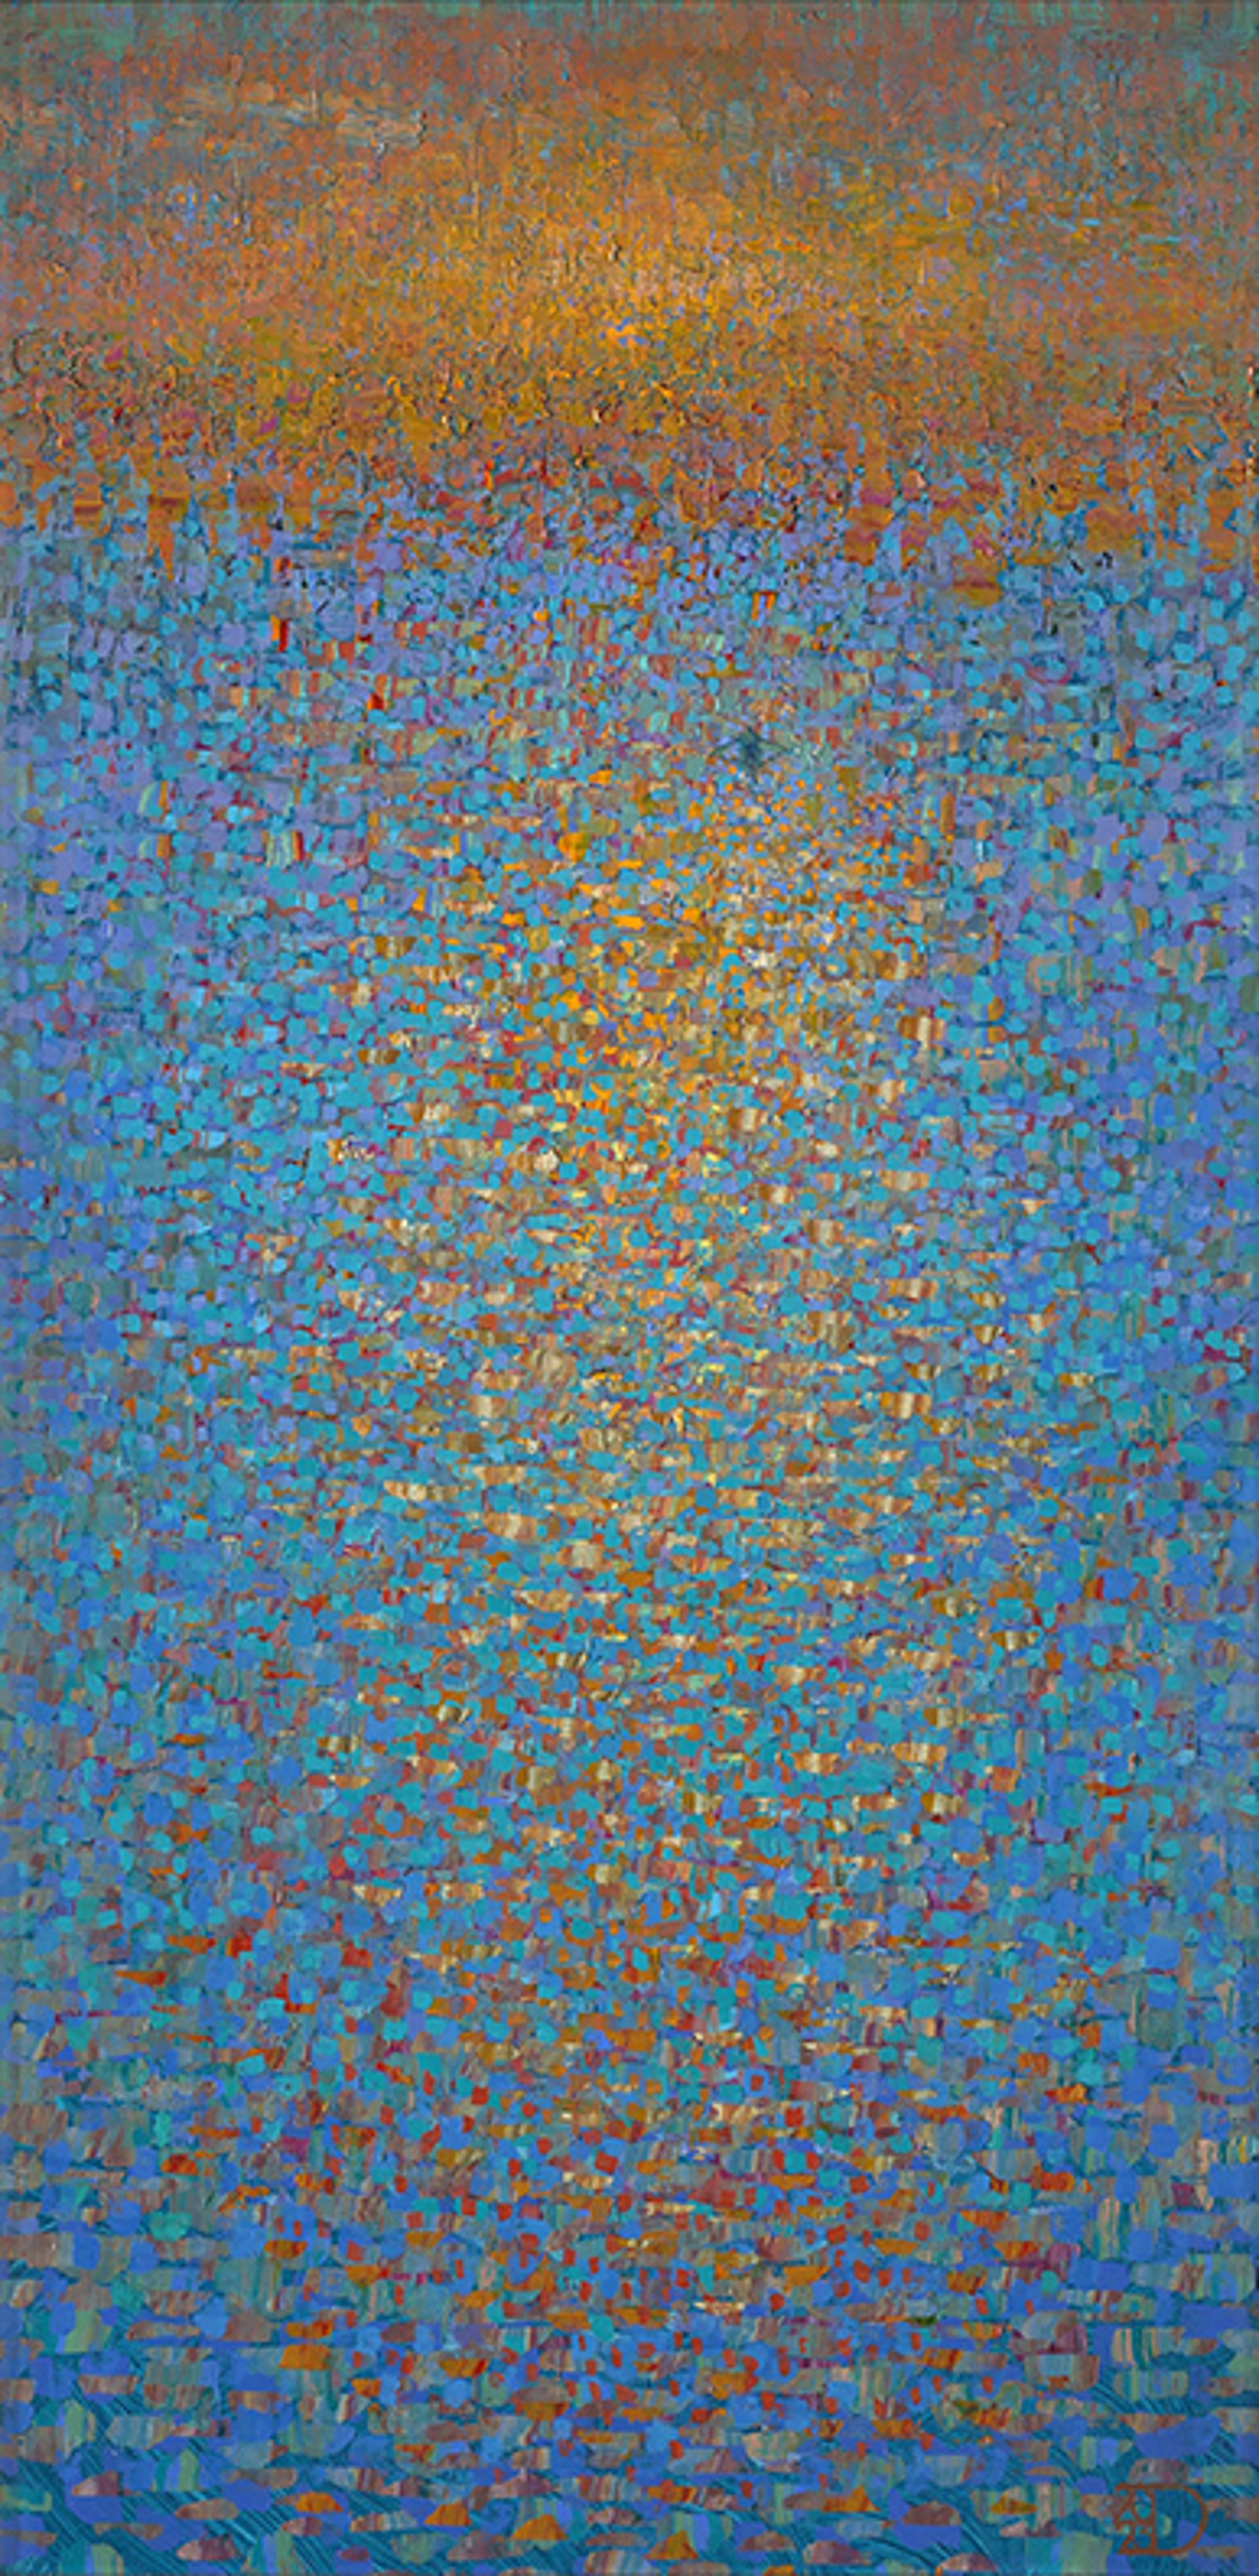 Remains of the day by Ton Dubbeldam